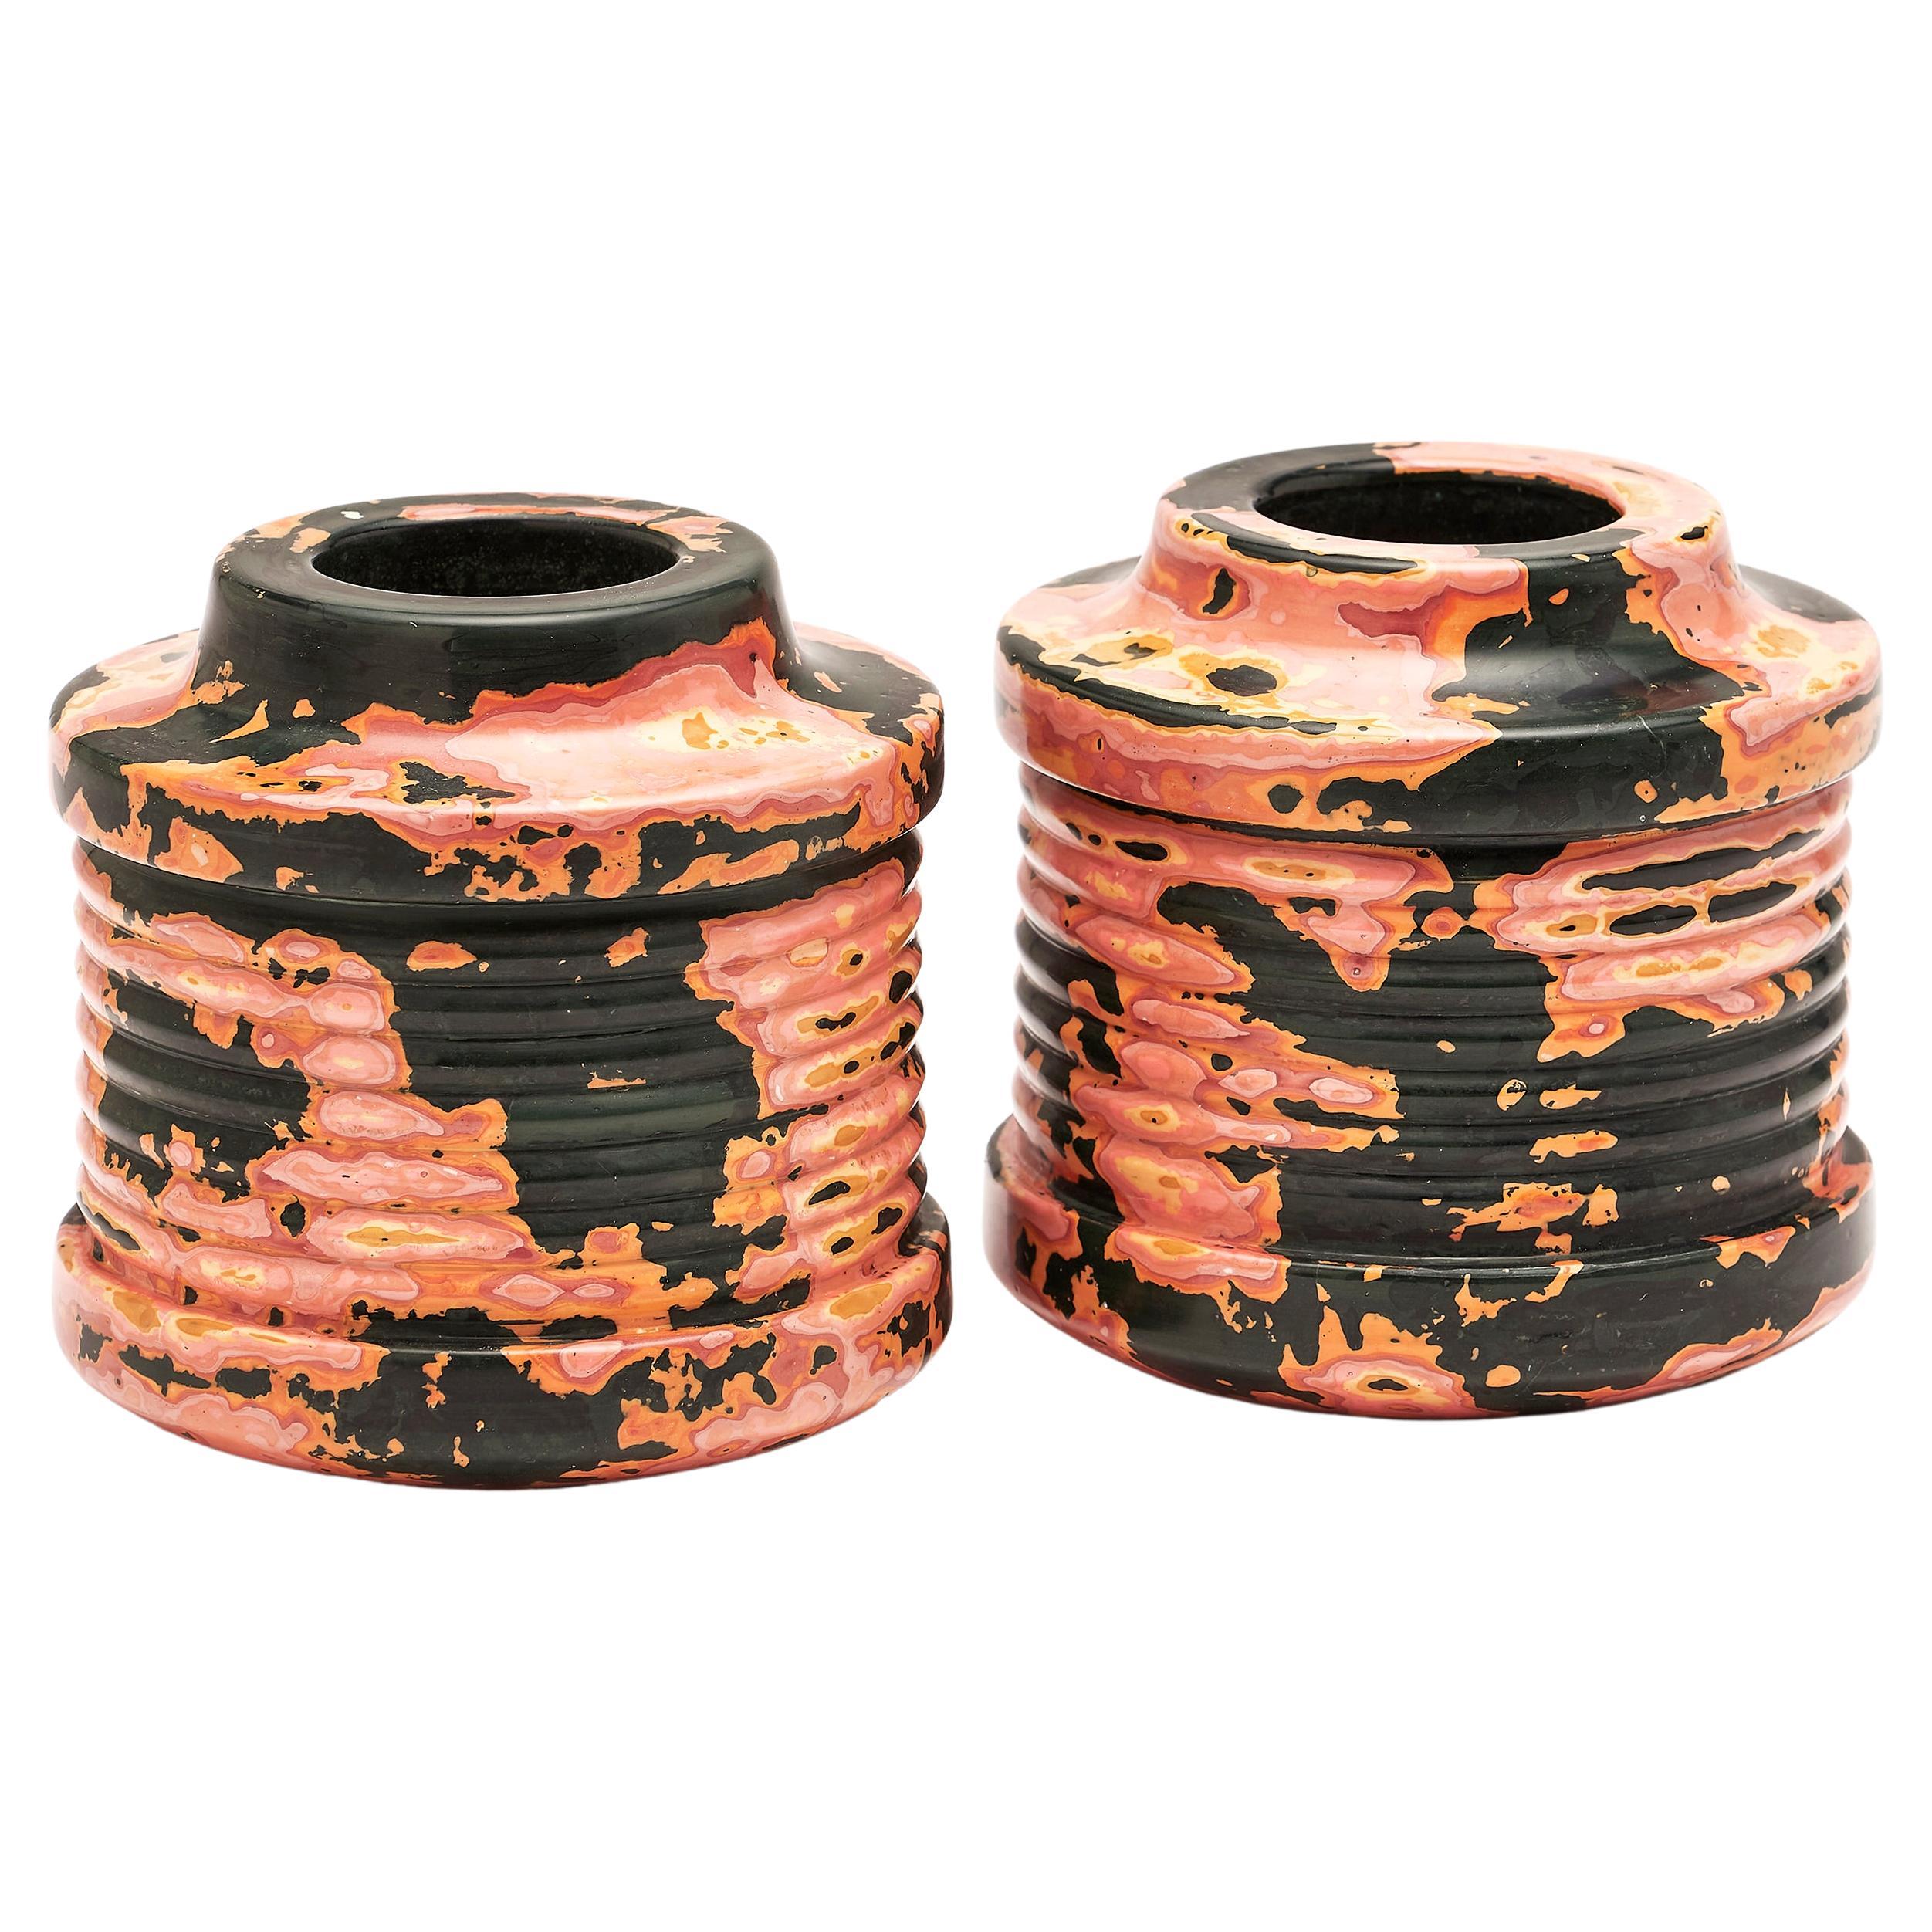 Coral Stone, Pair of Vases / Vessels in Pink, Orange & Green by Nic Parnell